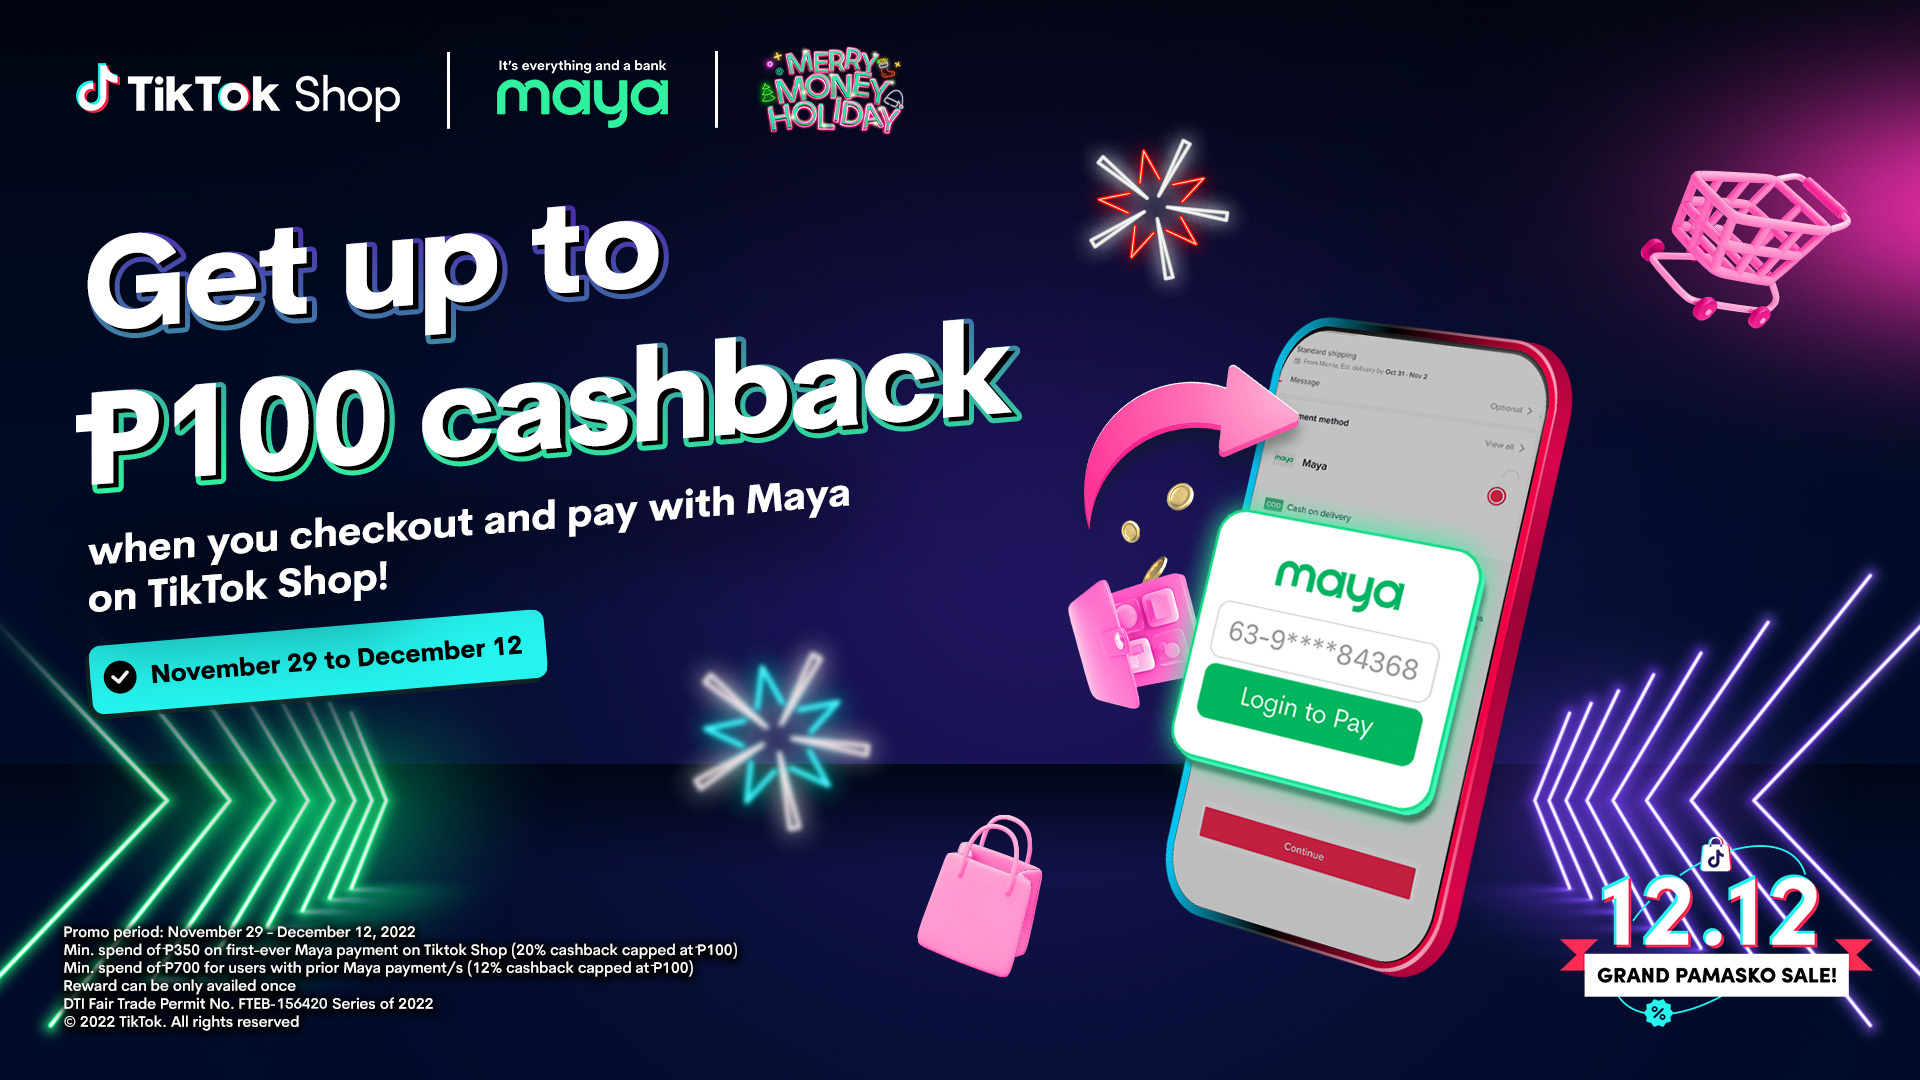 12.12 Grand Pamasko Sale: Get up to 20% Cashback when you checkout and pay with Maya on TikTok Shop